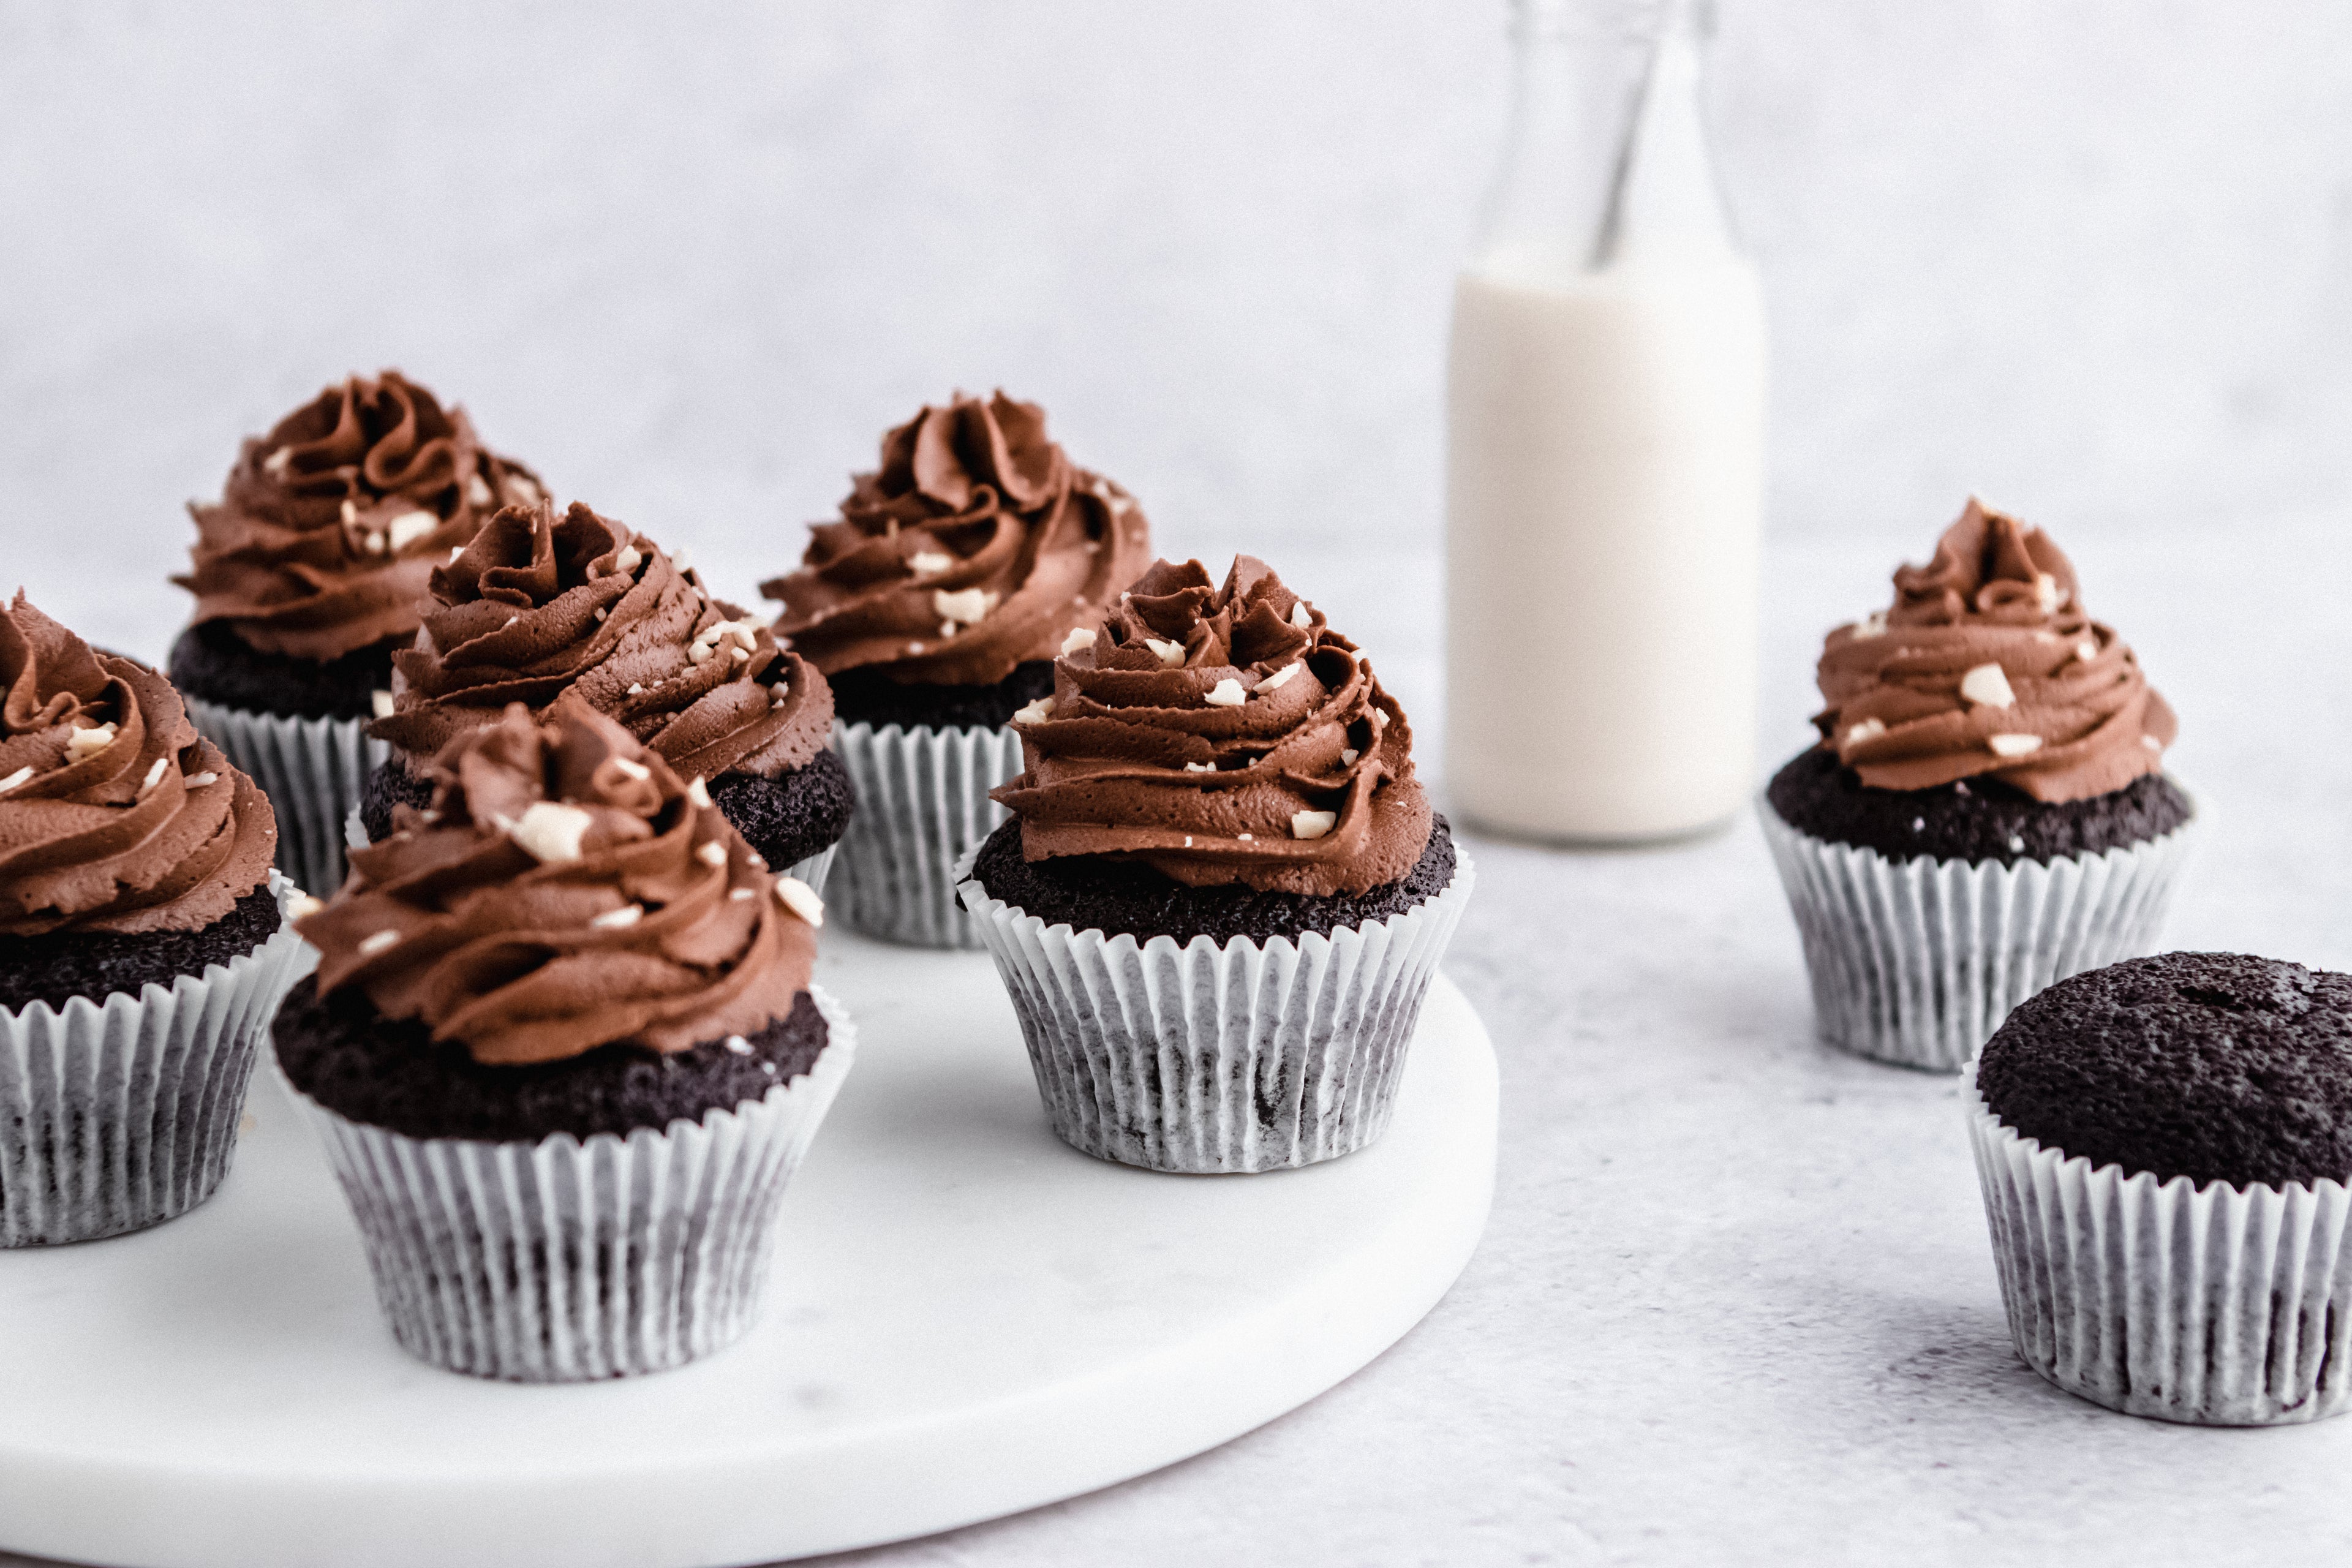 Nutella Cupcakes with a glass bottle of milk in the background